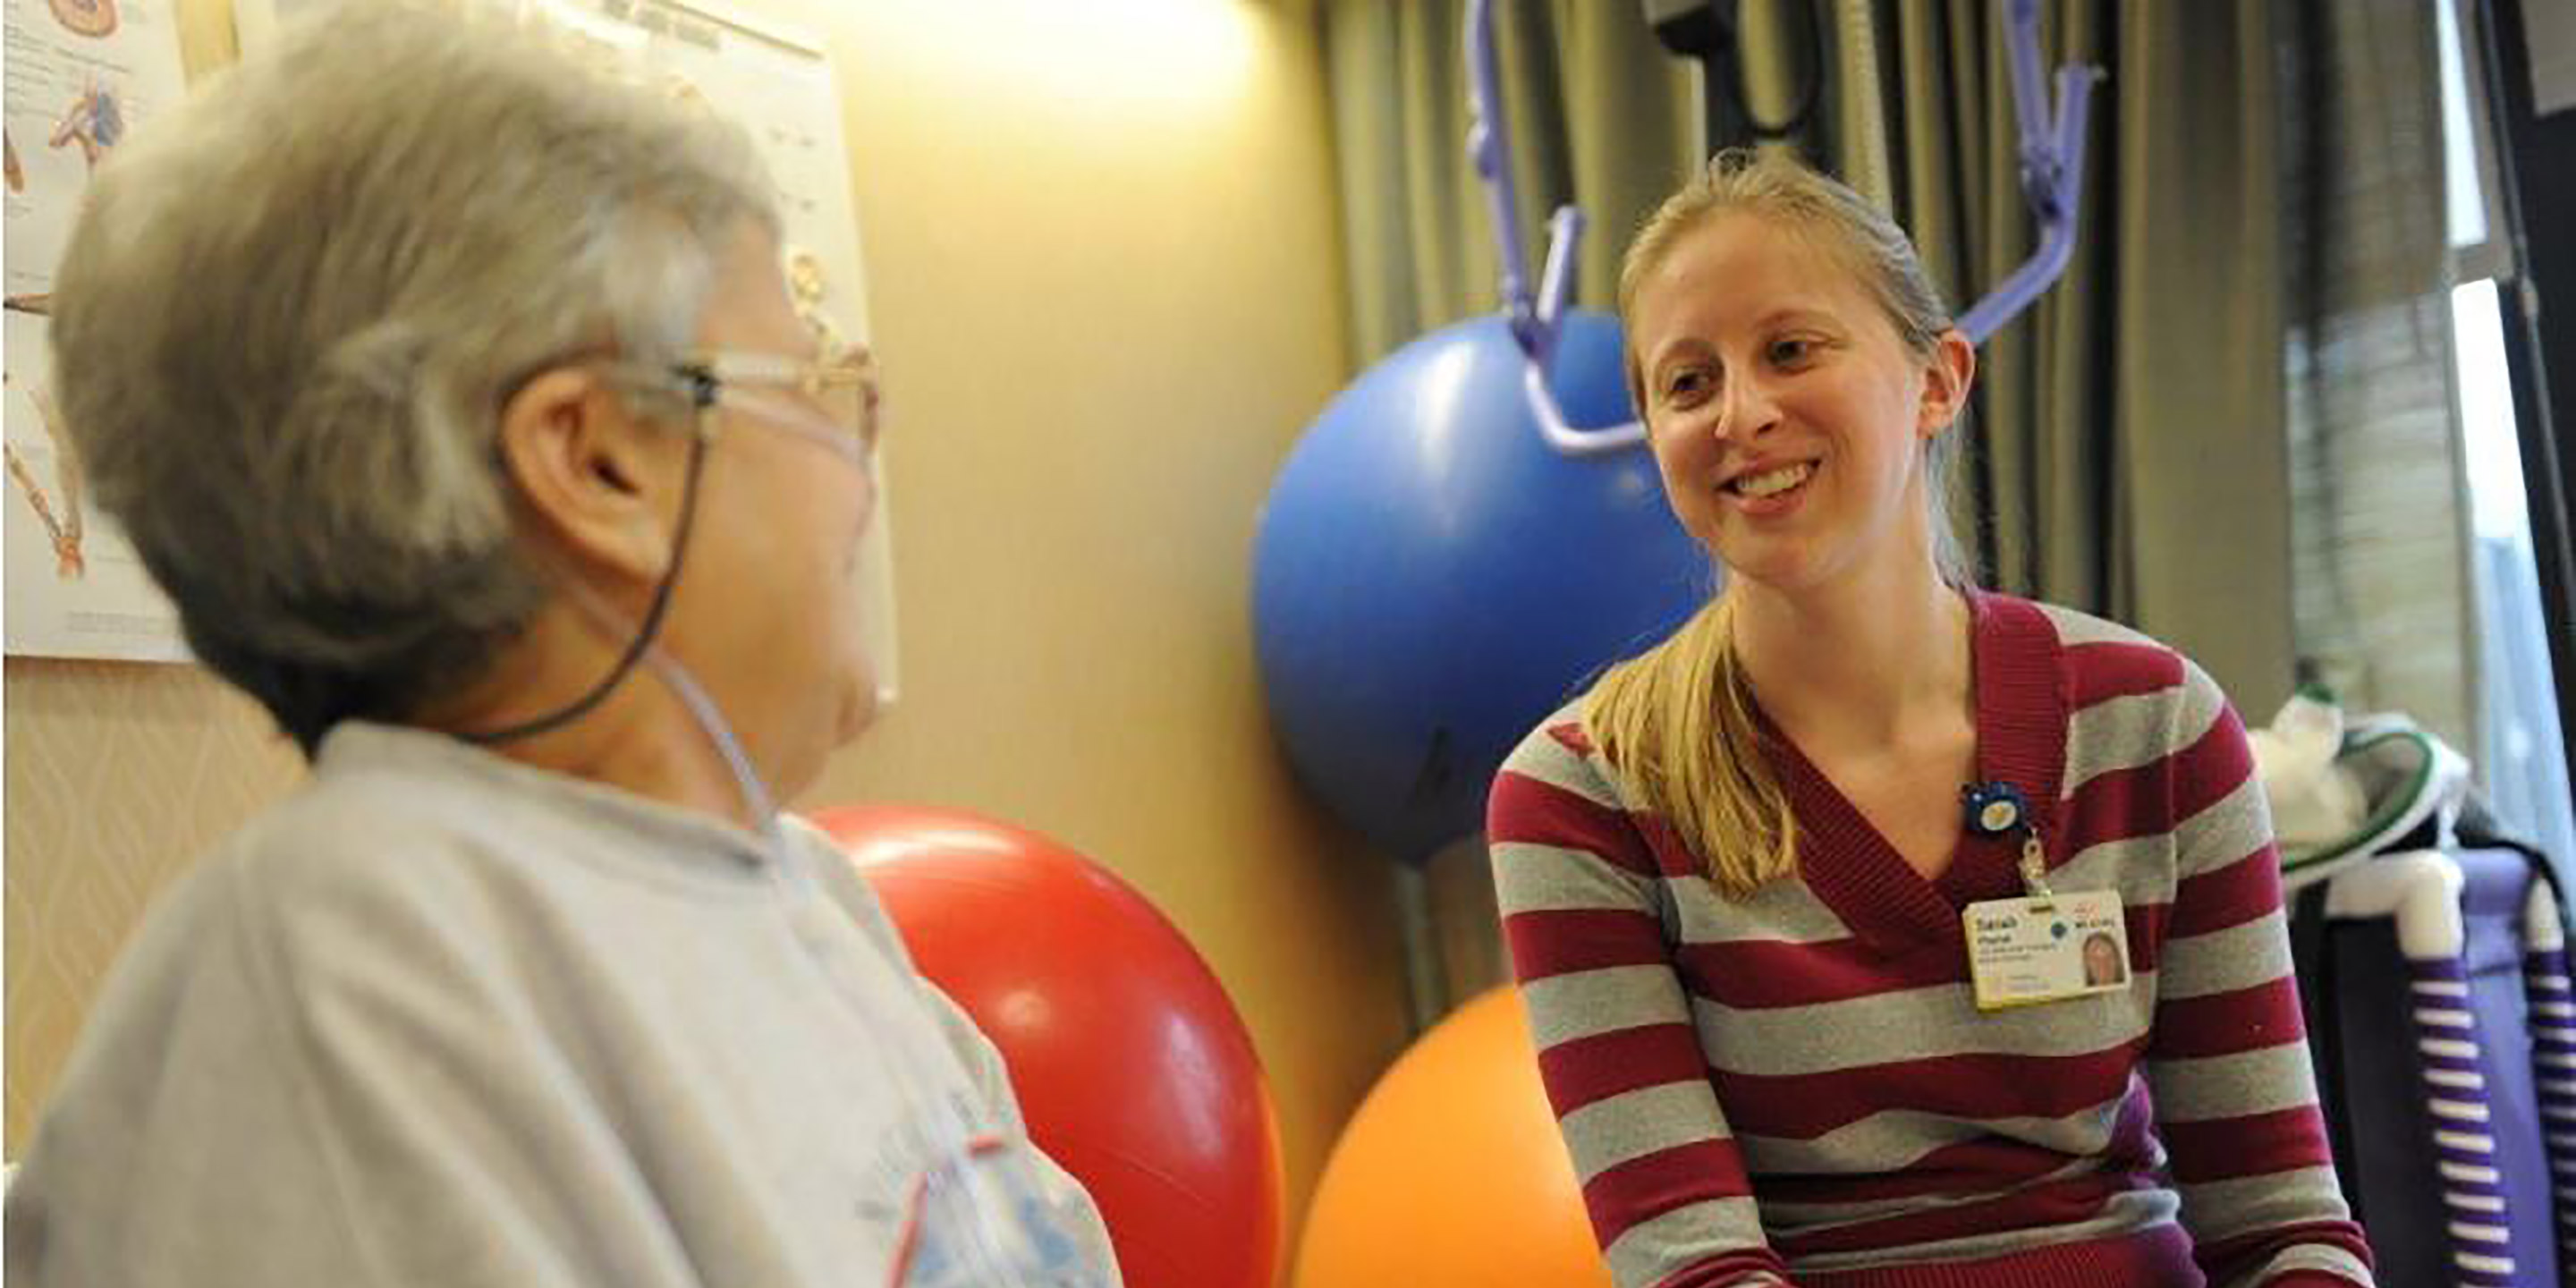 A patient meets with a therapist during a rehabilitation session with staff at Hebrew Rehabilitation Center. 